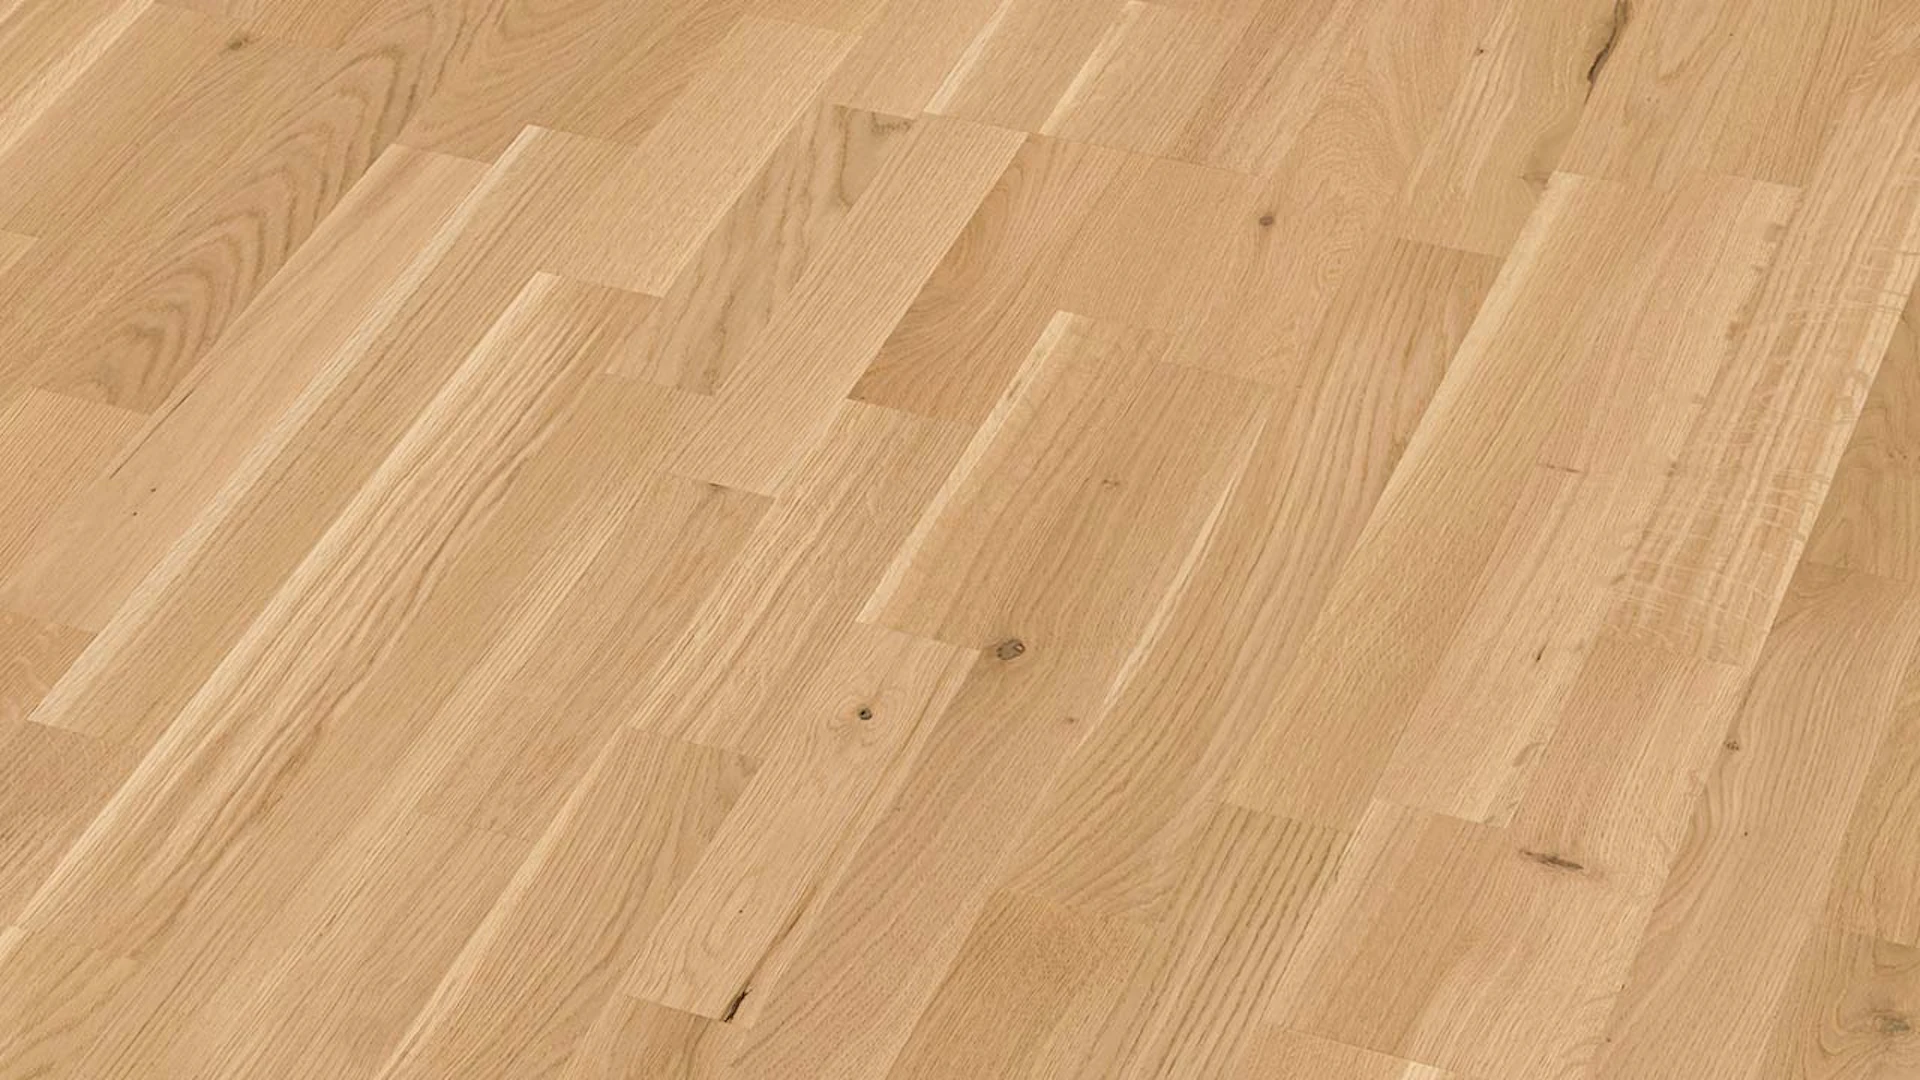 MEISTER Parquet Flooring - Longlife PC 200 Oak lively pure (500009-2400200-09036)